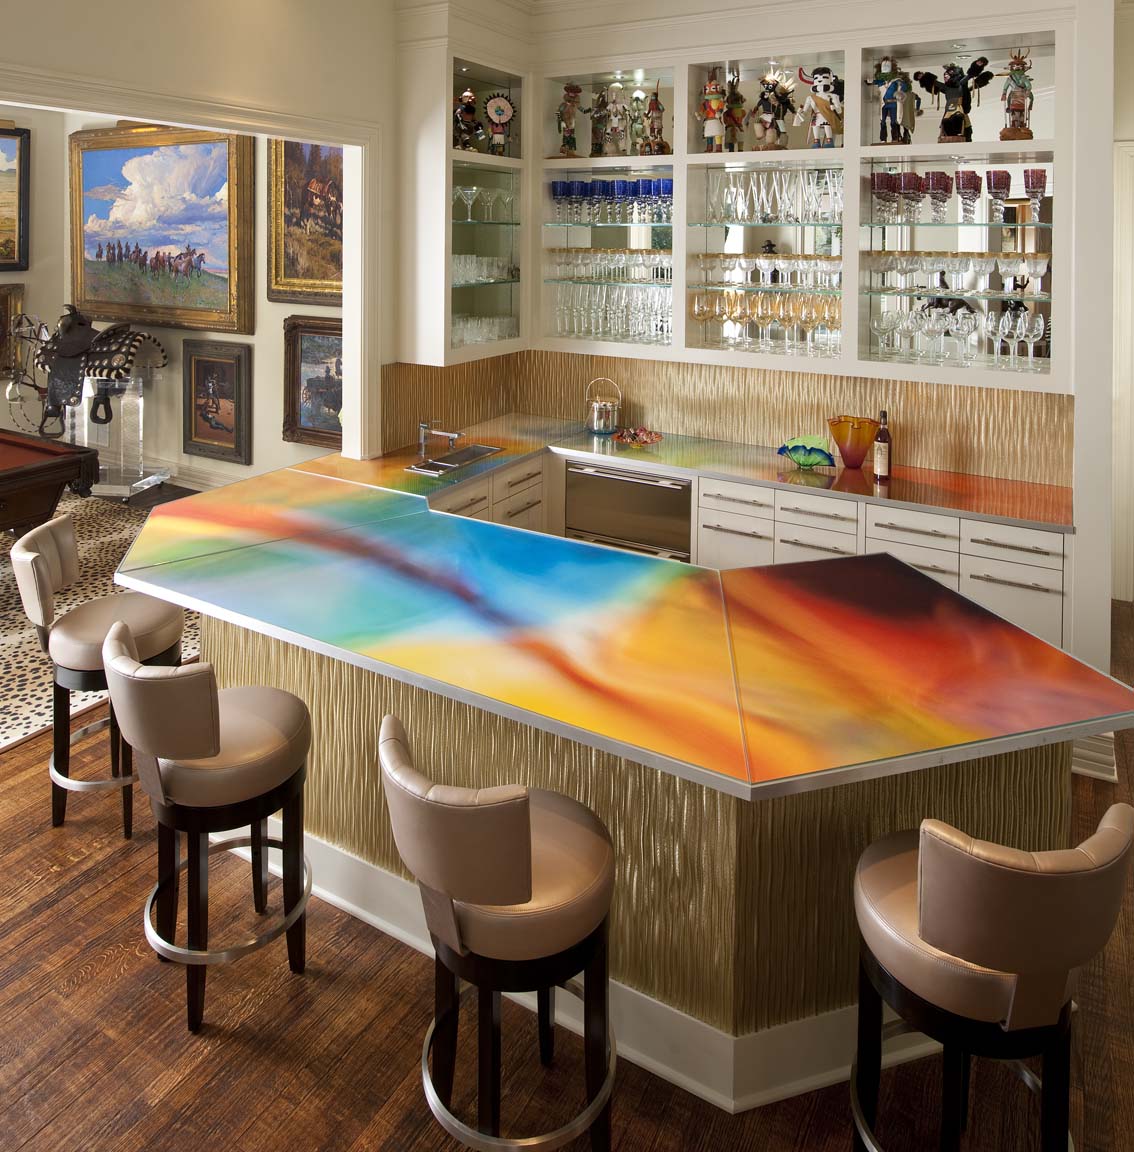  Won Honorable Mention in Residential Product Design for Billiard Bar Countertop in Design Ovation 2013 